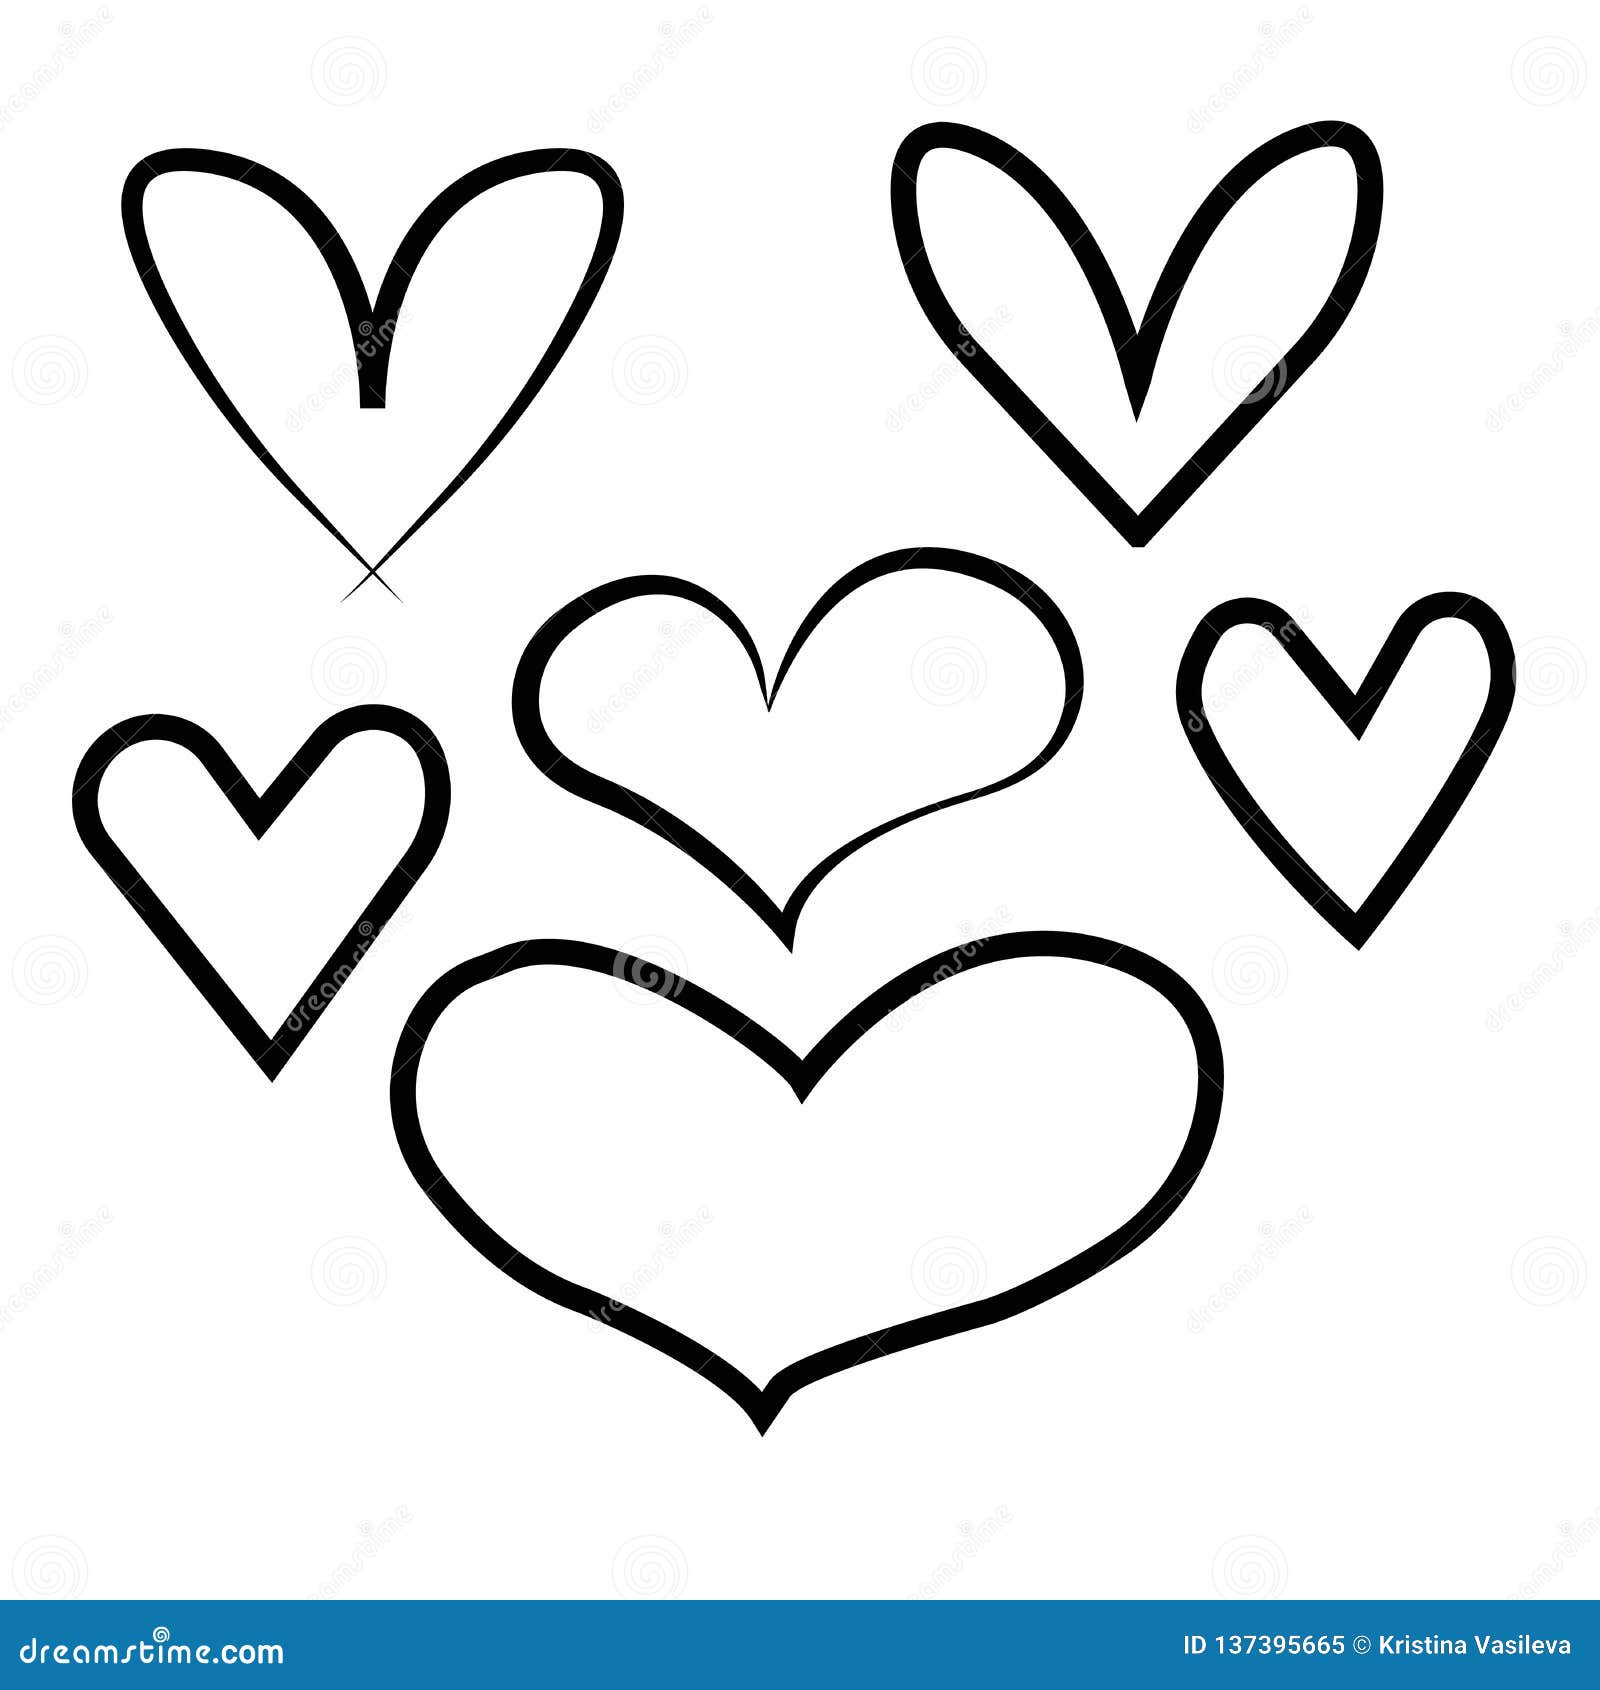 Drawn Vector Heart Outline